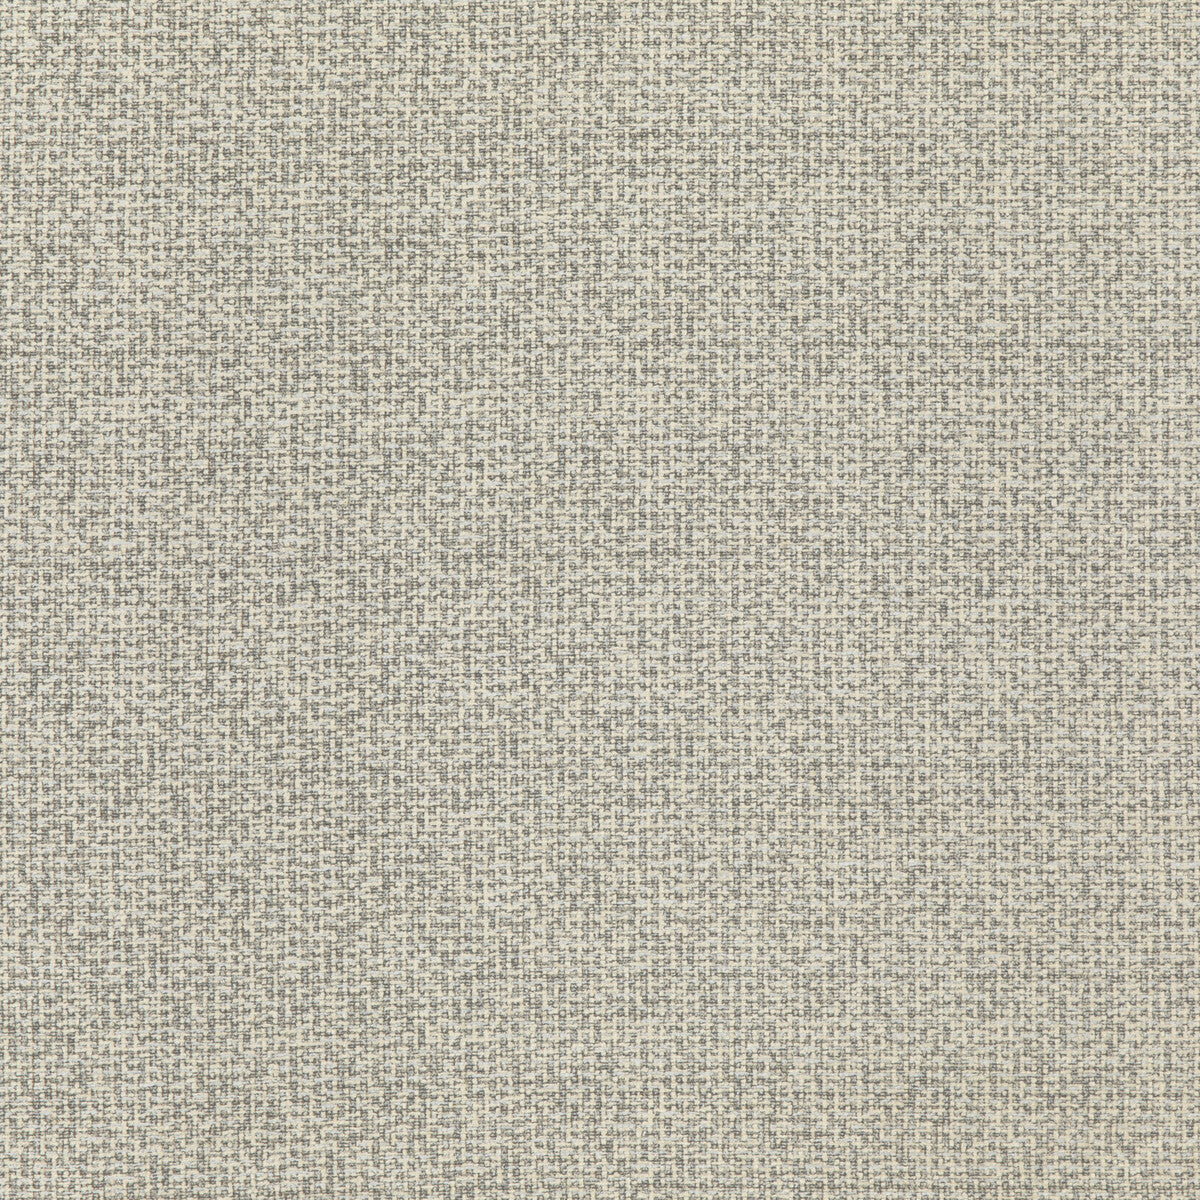 Cala fabric in parchment color - pattern ED85297.225.0 - by Threads in the Luxury Weaves collection